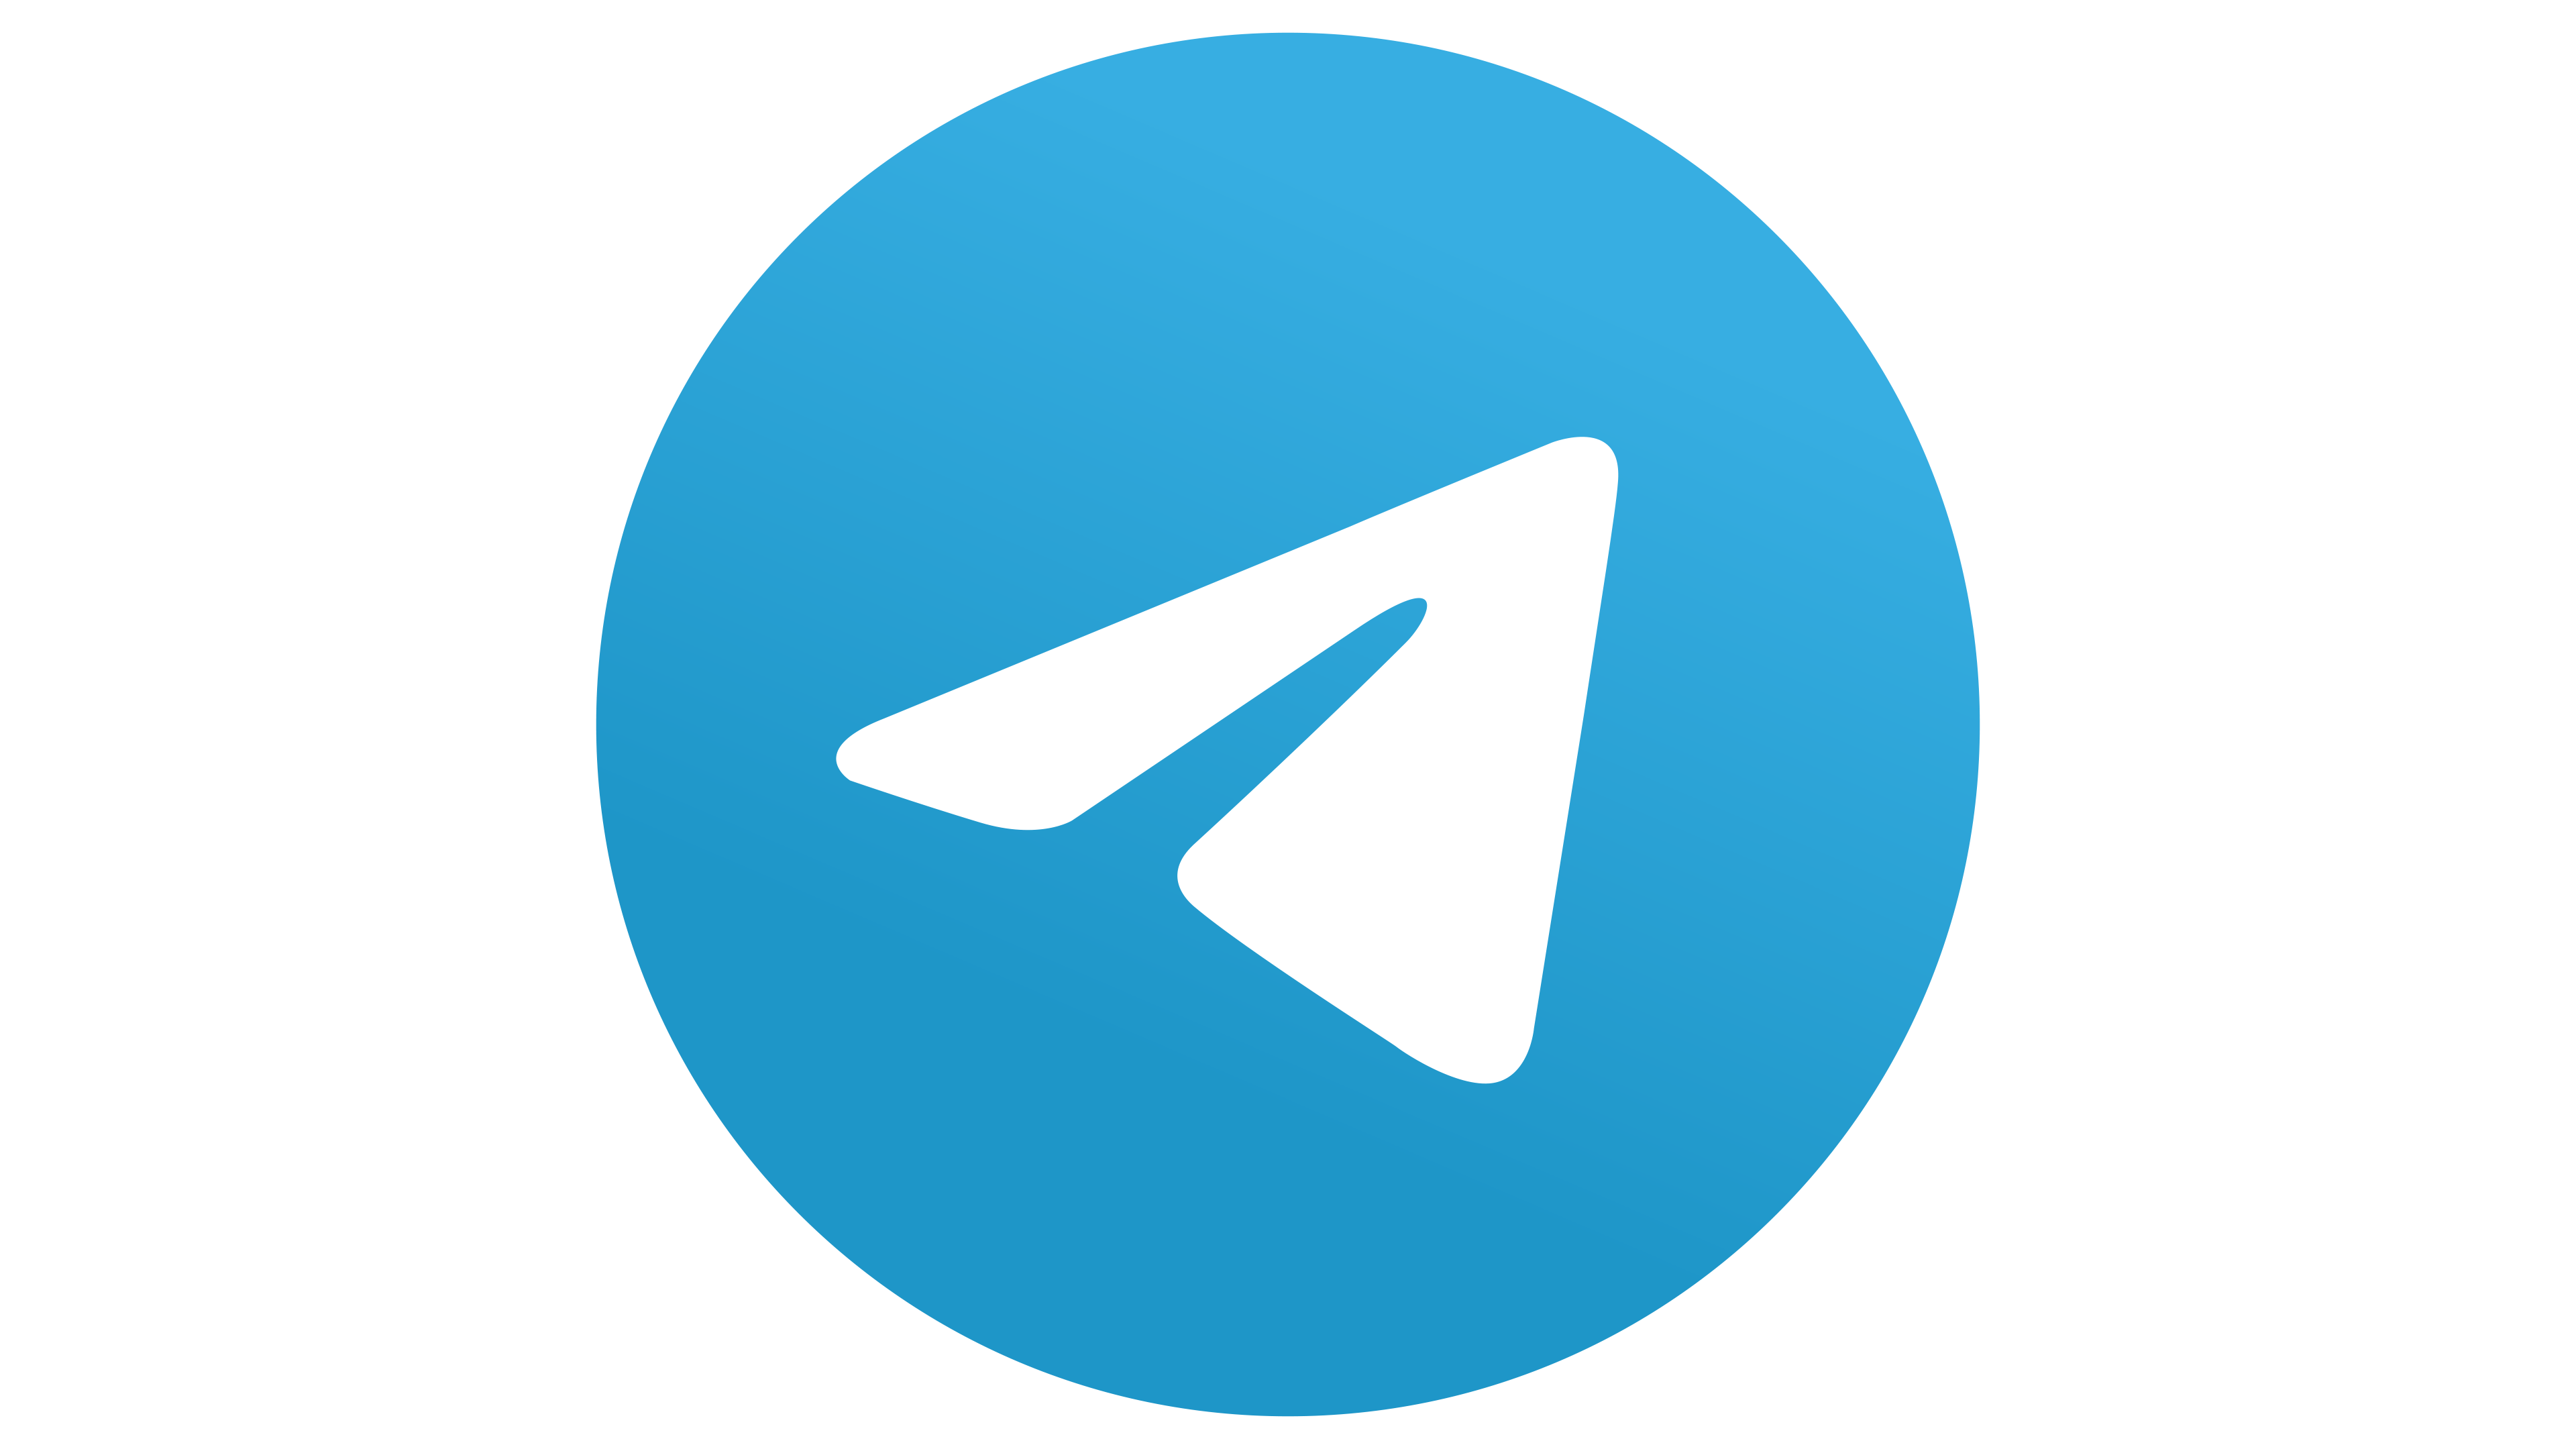 Telegram Desktop App On Windows Gets Updated With Many New Features